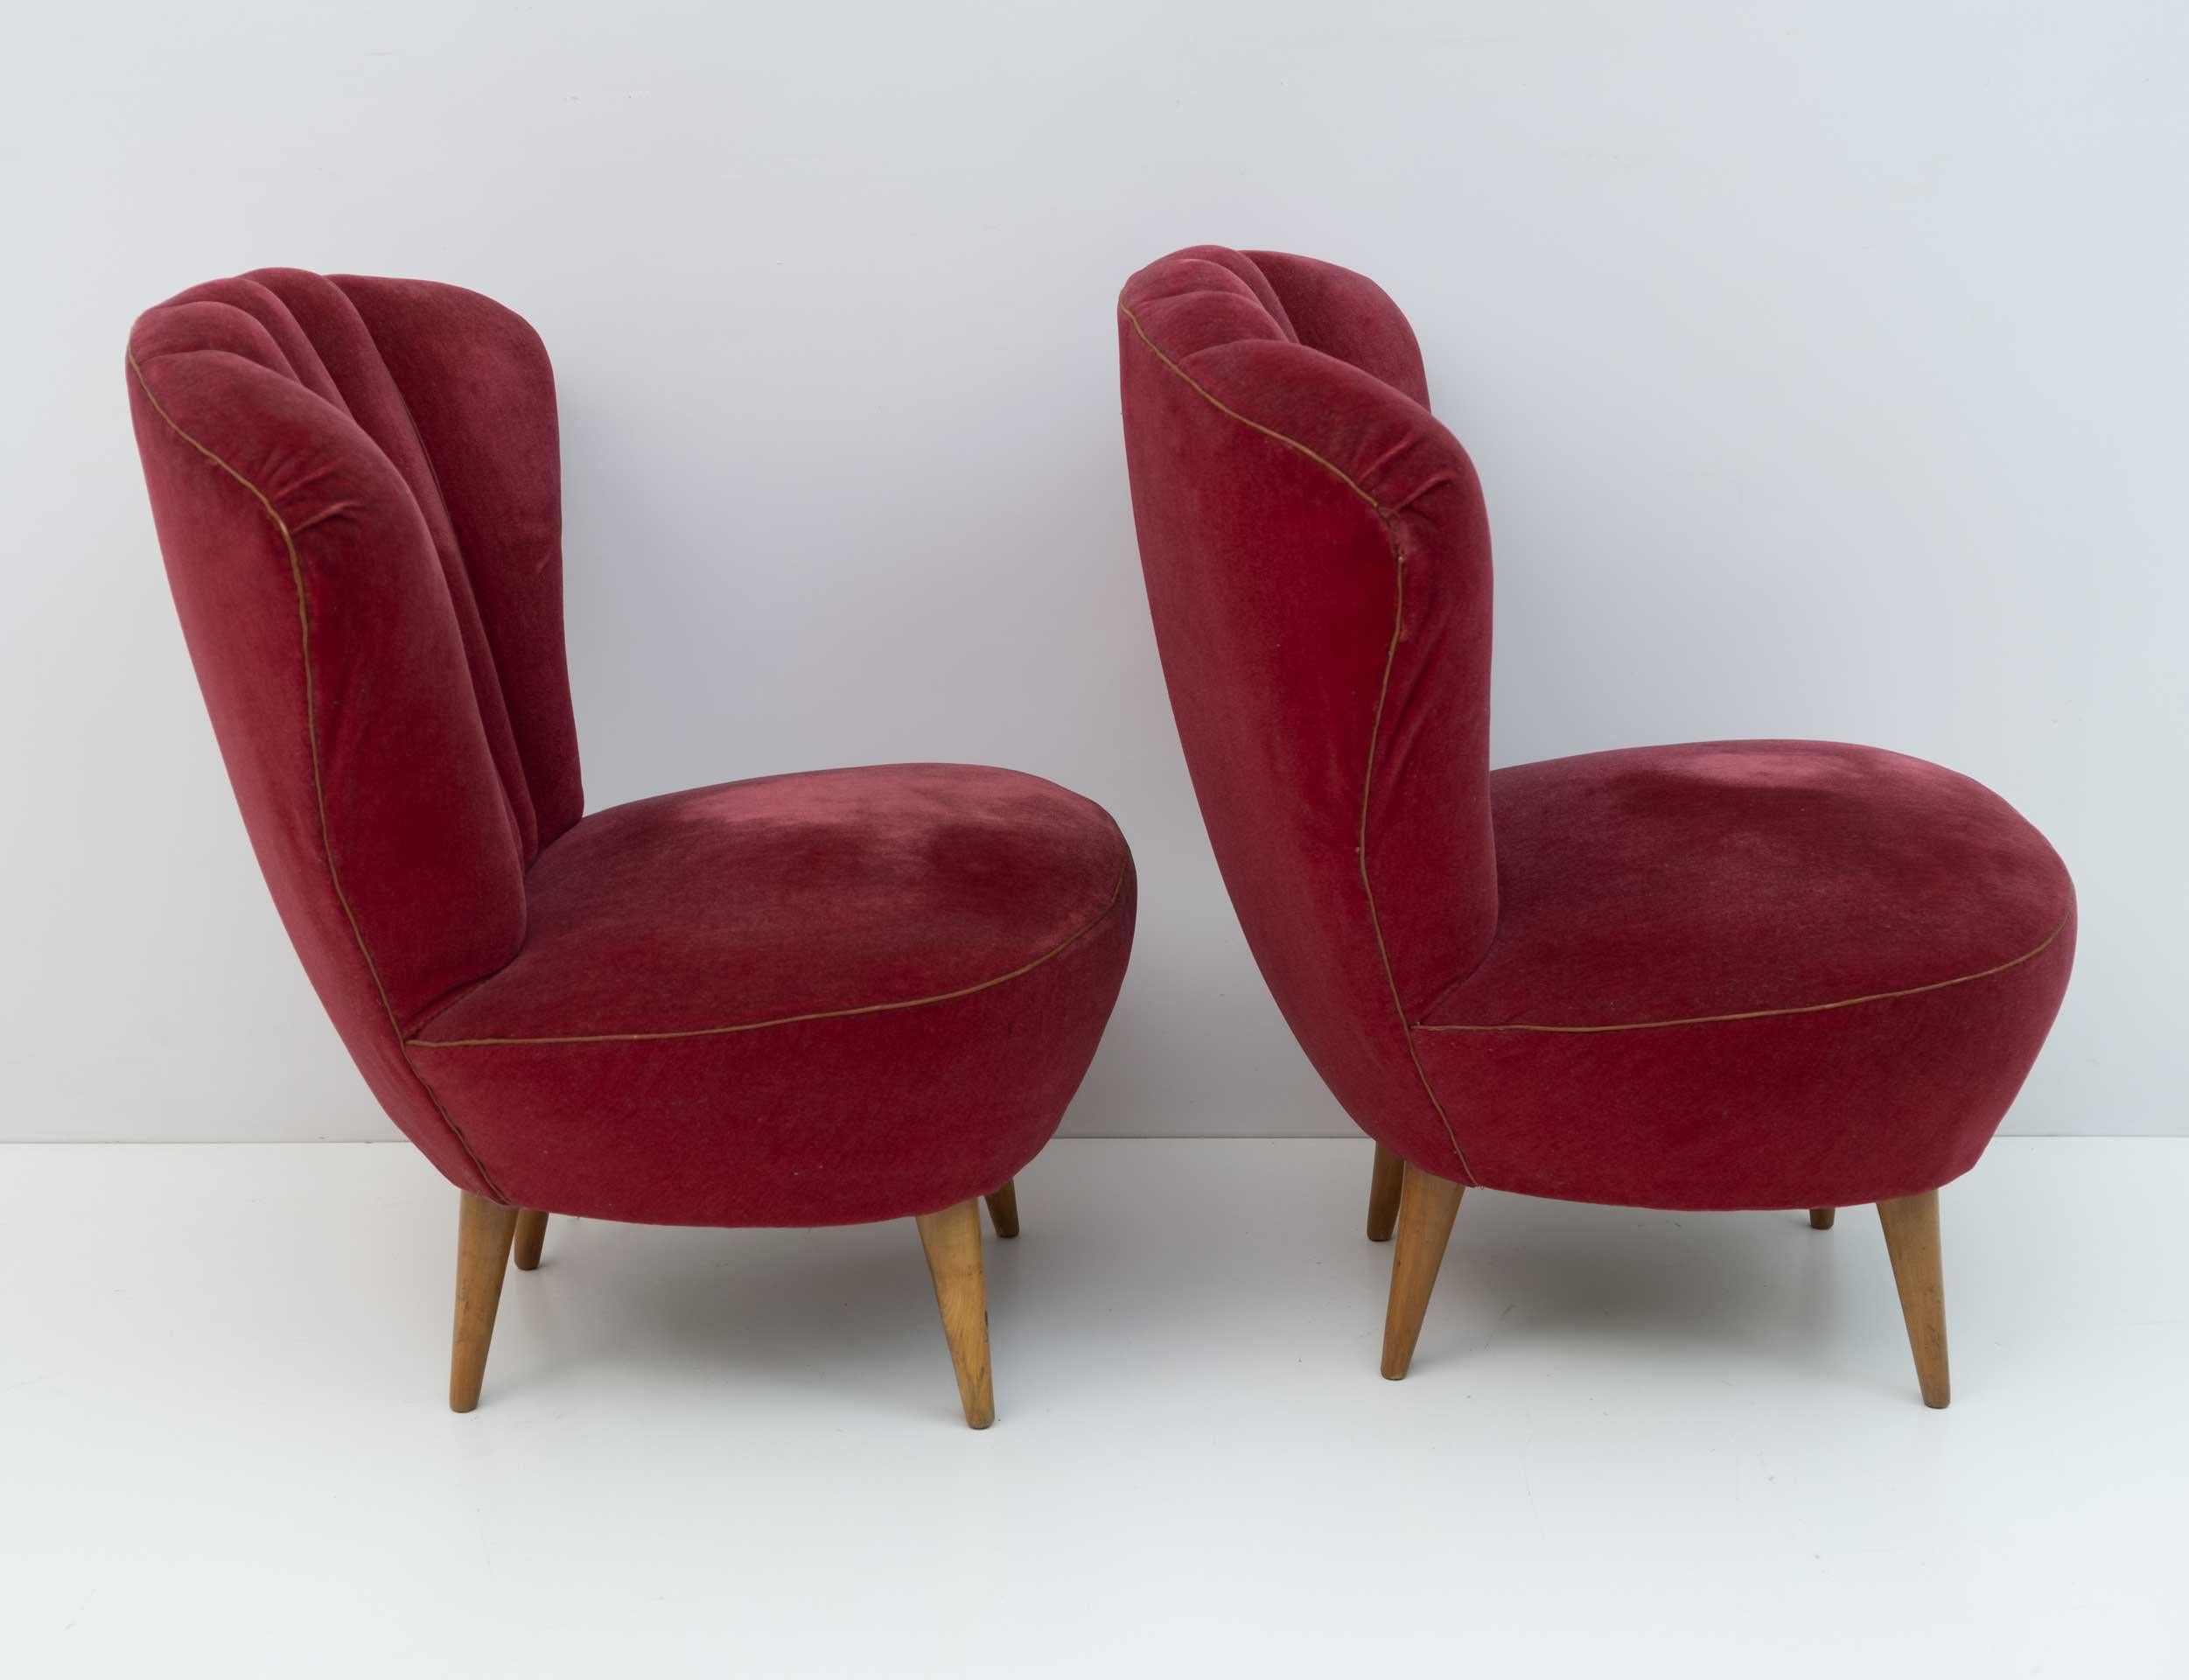 Velvet Pair of After Gio Ponti Mid-Century Modern Italian Small Armchairs by ISA, 1950s